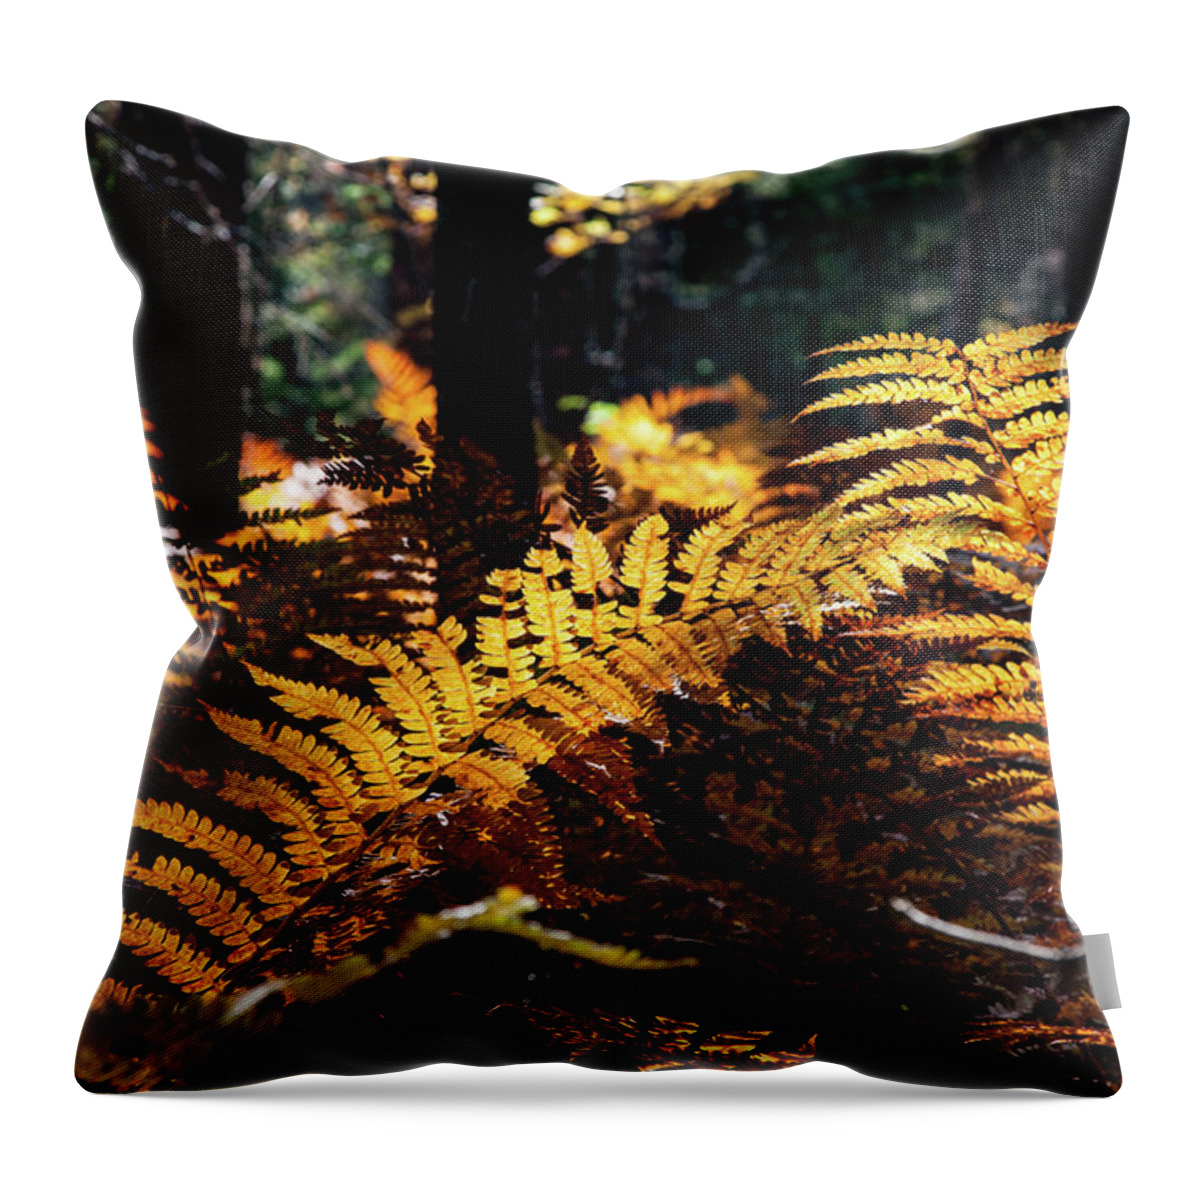 Autumn Throw Pillow featuring the photograph Maine Autumn Ferns by Jeff Folger